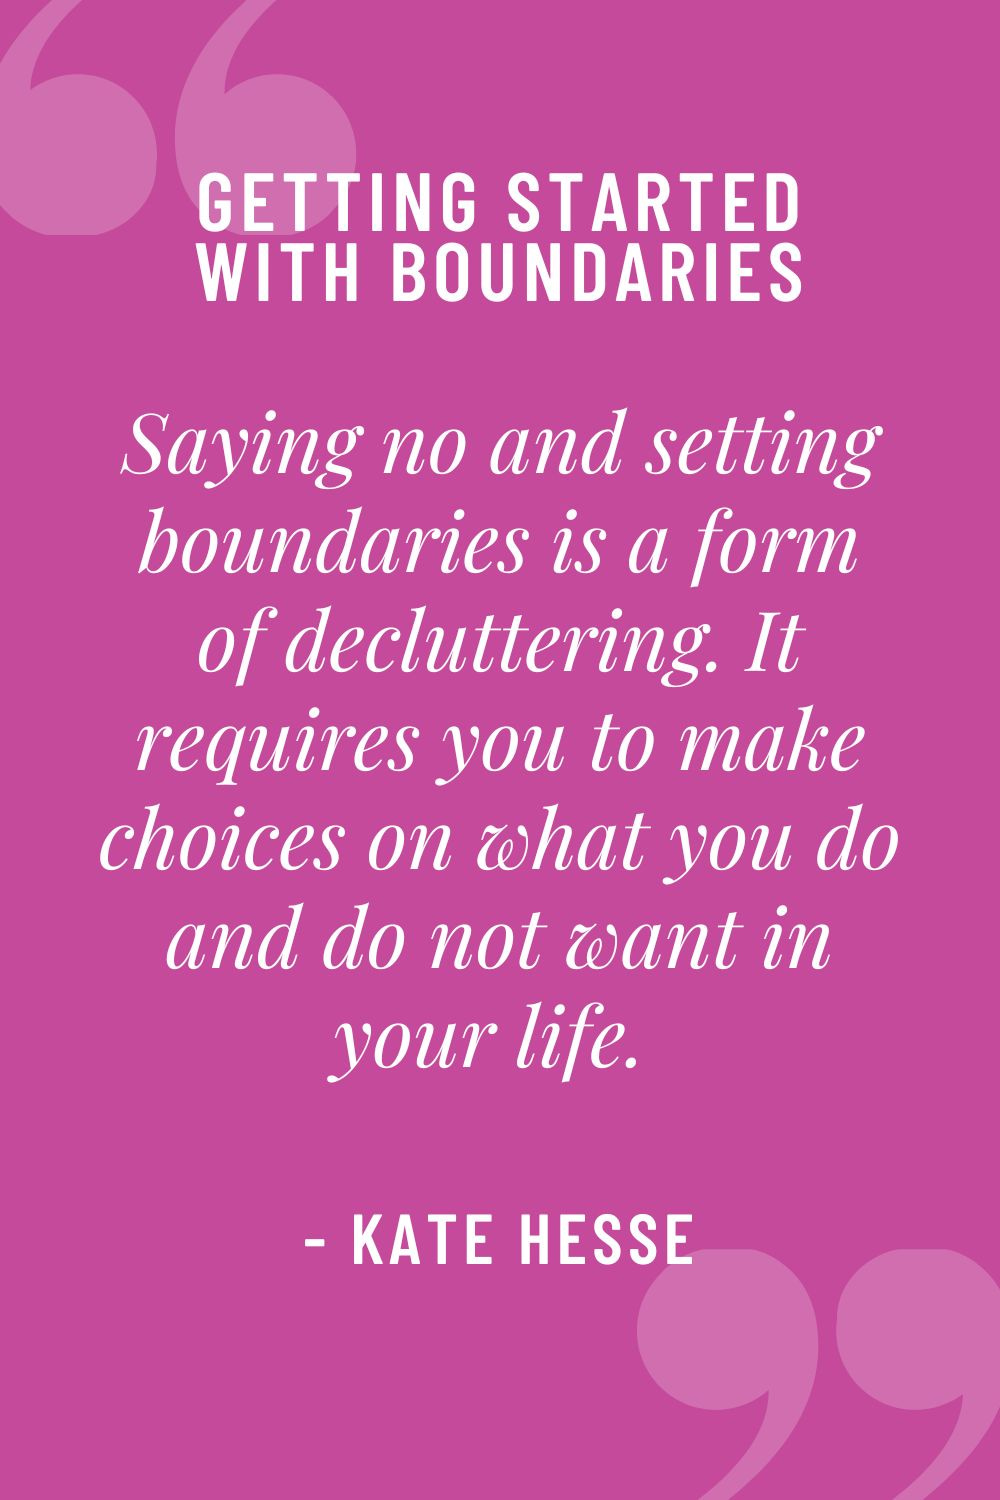 Saying no and setting boundaries is a form of decluttering. It requires you to make choices on what you do and do not want in your life.